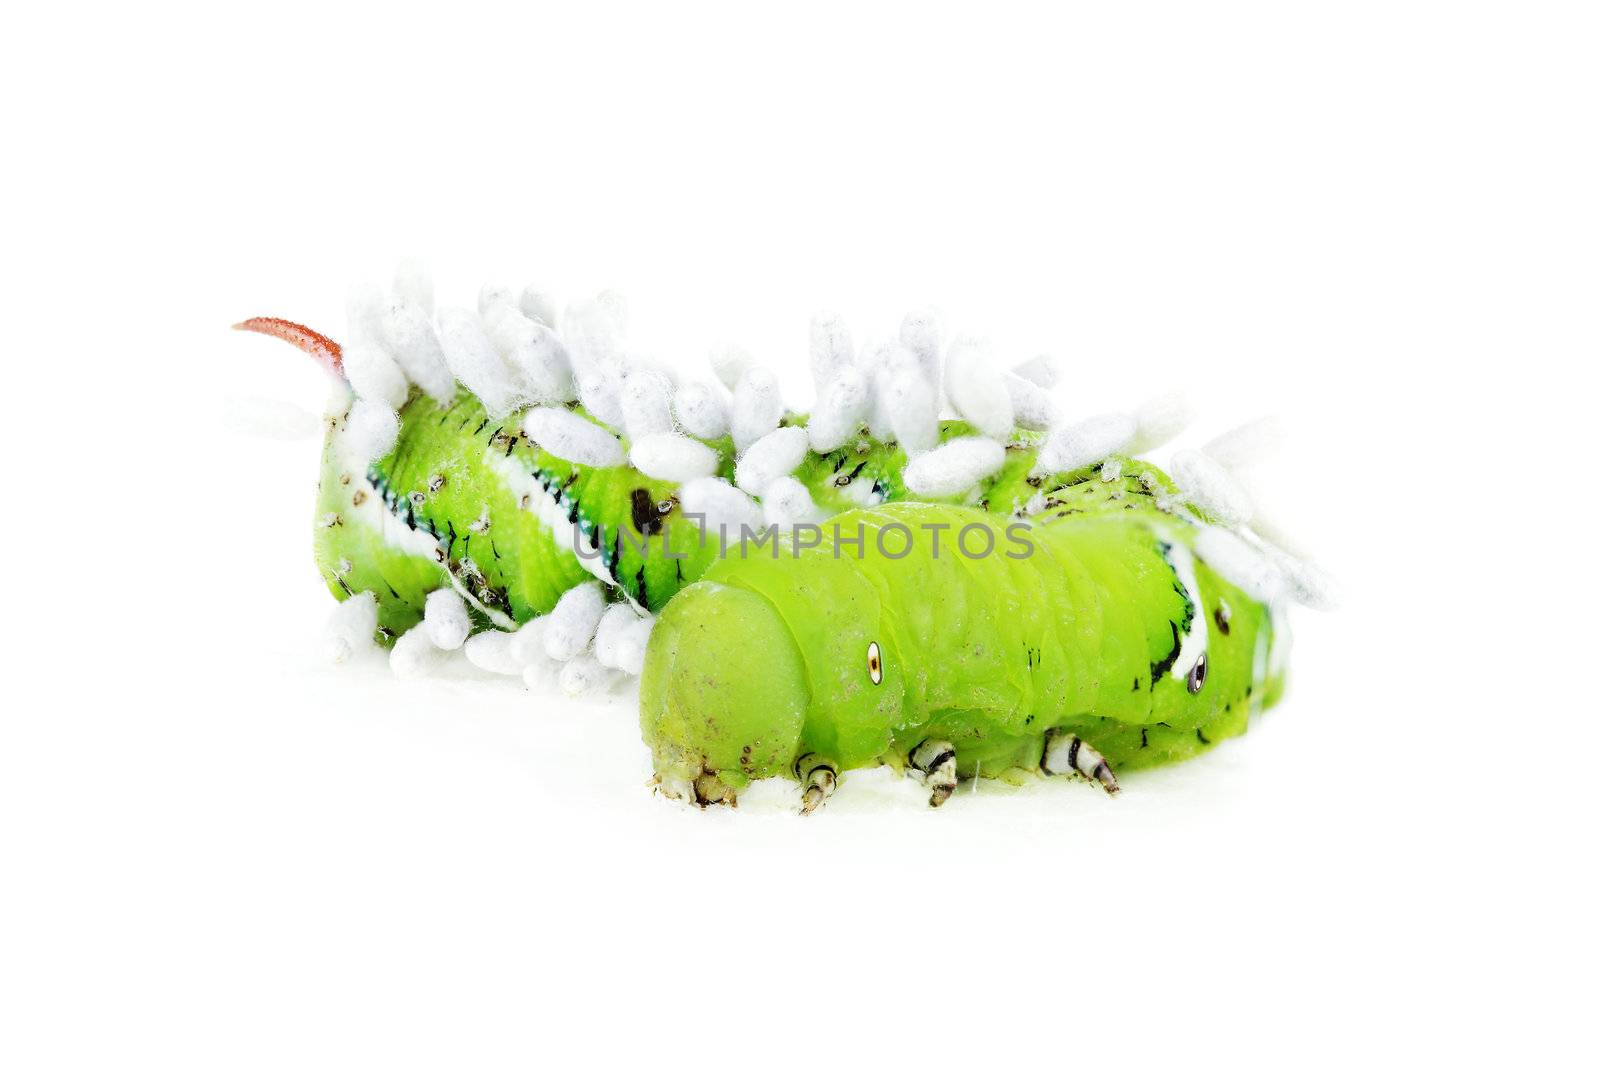 Tobacco Hornworm (Manduca Quinquemaculata) covered in Braconid Wasp eggs isolated on a white background